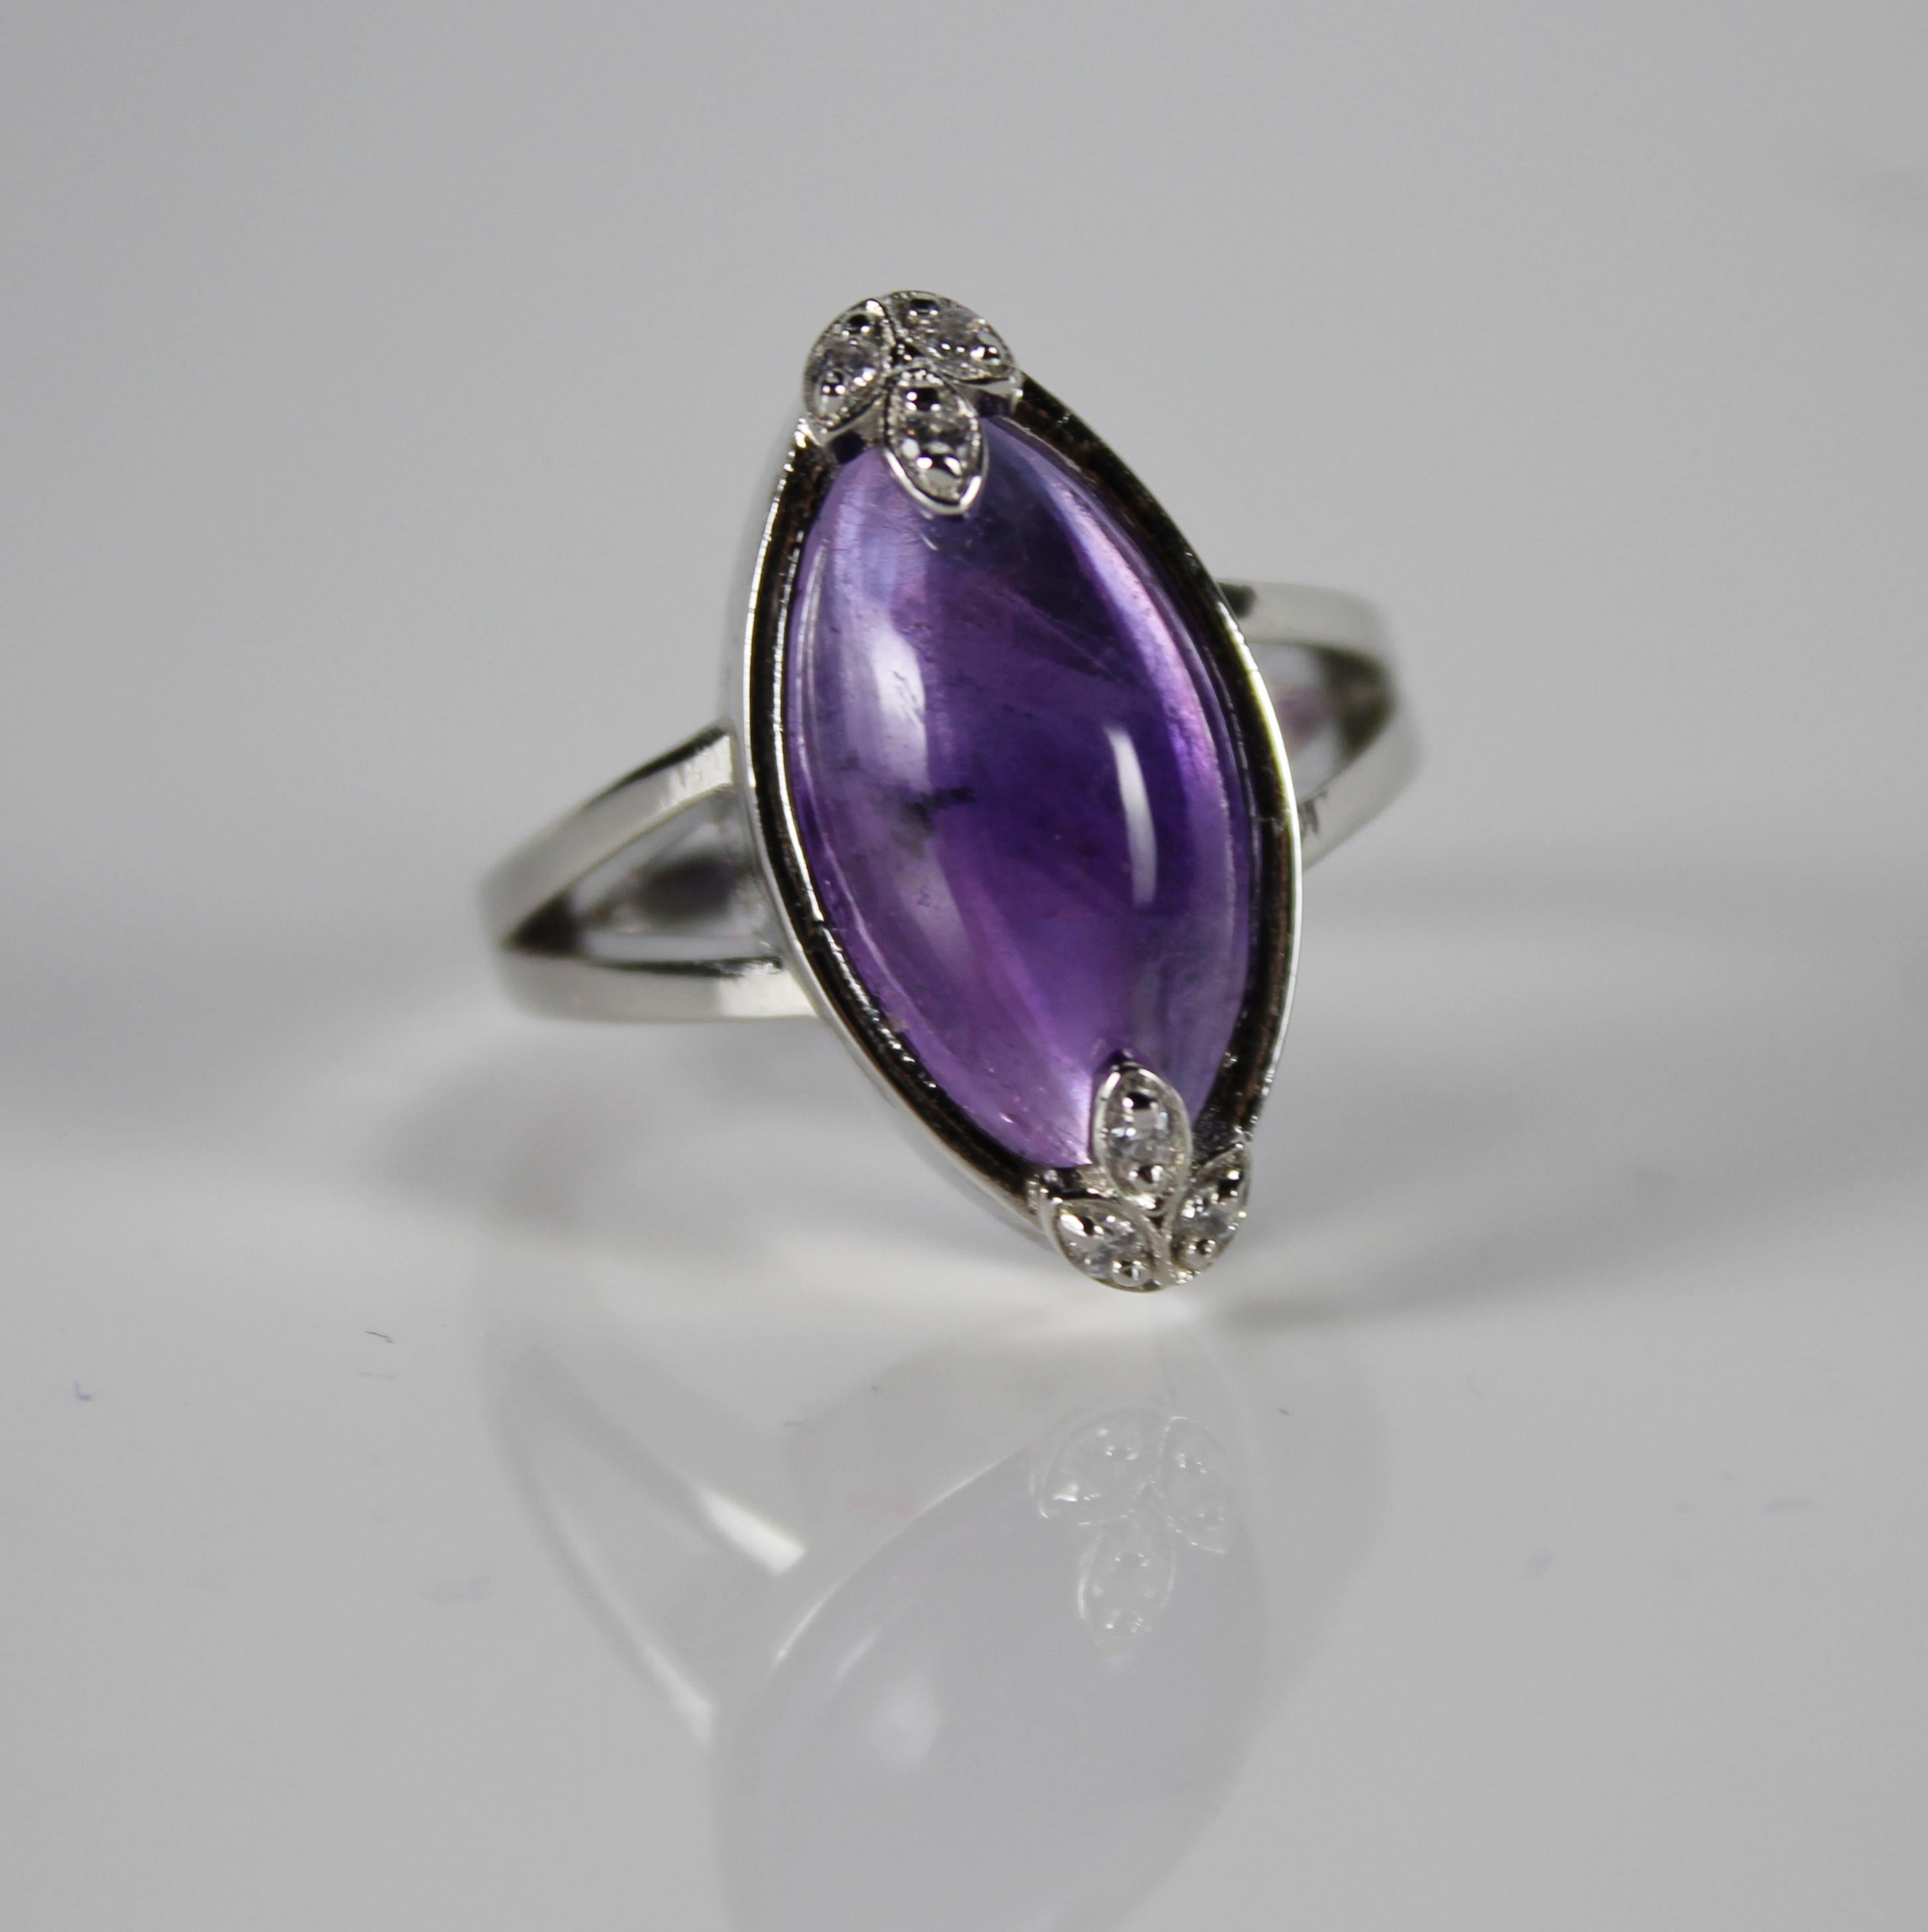 Product Details:

Metal - Silver
Indian ring size - 9
Product gross Weight - 4.470 Grams
Gemstone - Amethyst
Stone weight - 6 Carat
Stone shape - Marquise
Stone size - 19 x 10 mm

Minimalistic designer ring made in silver with beautiful natural